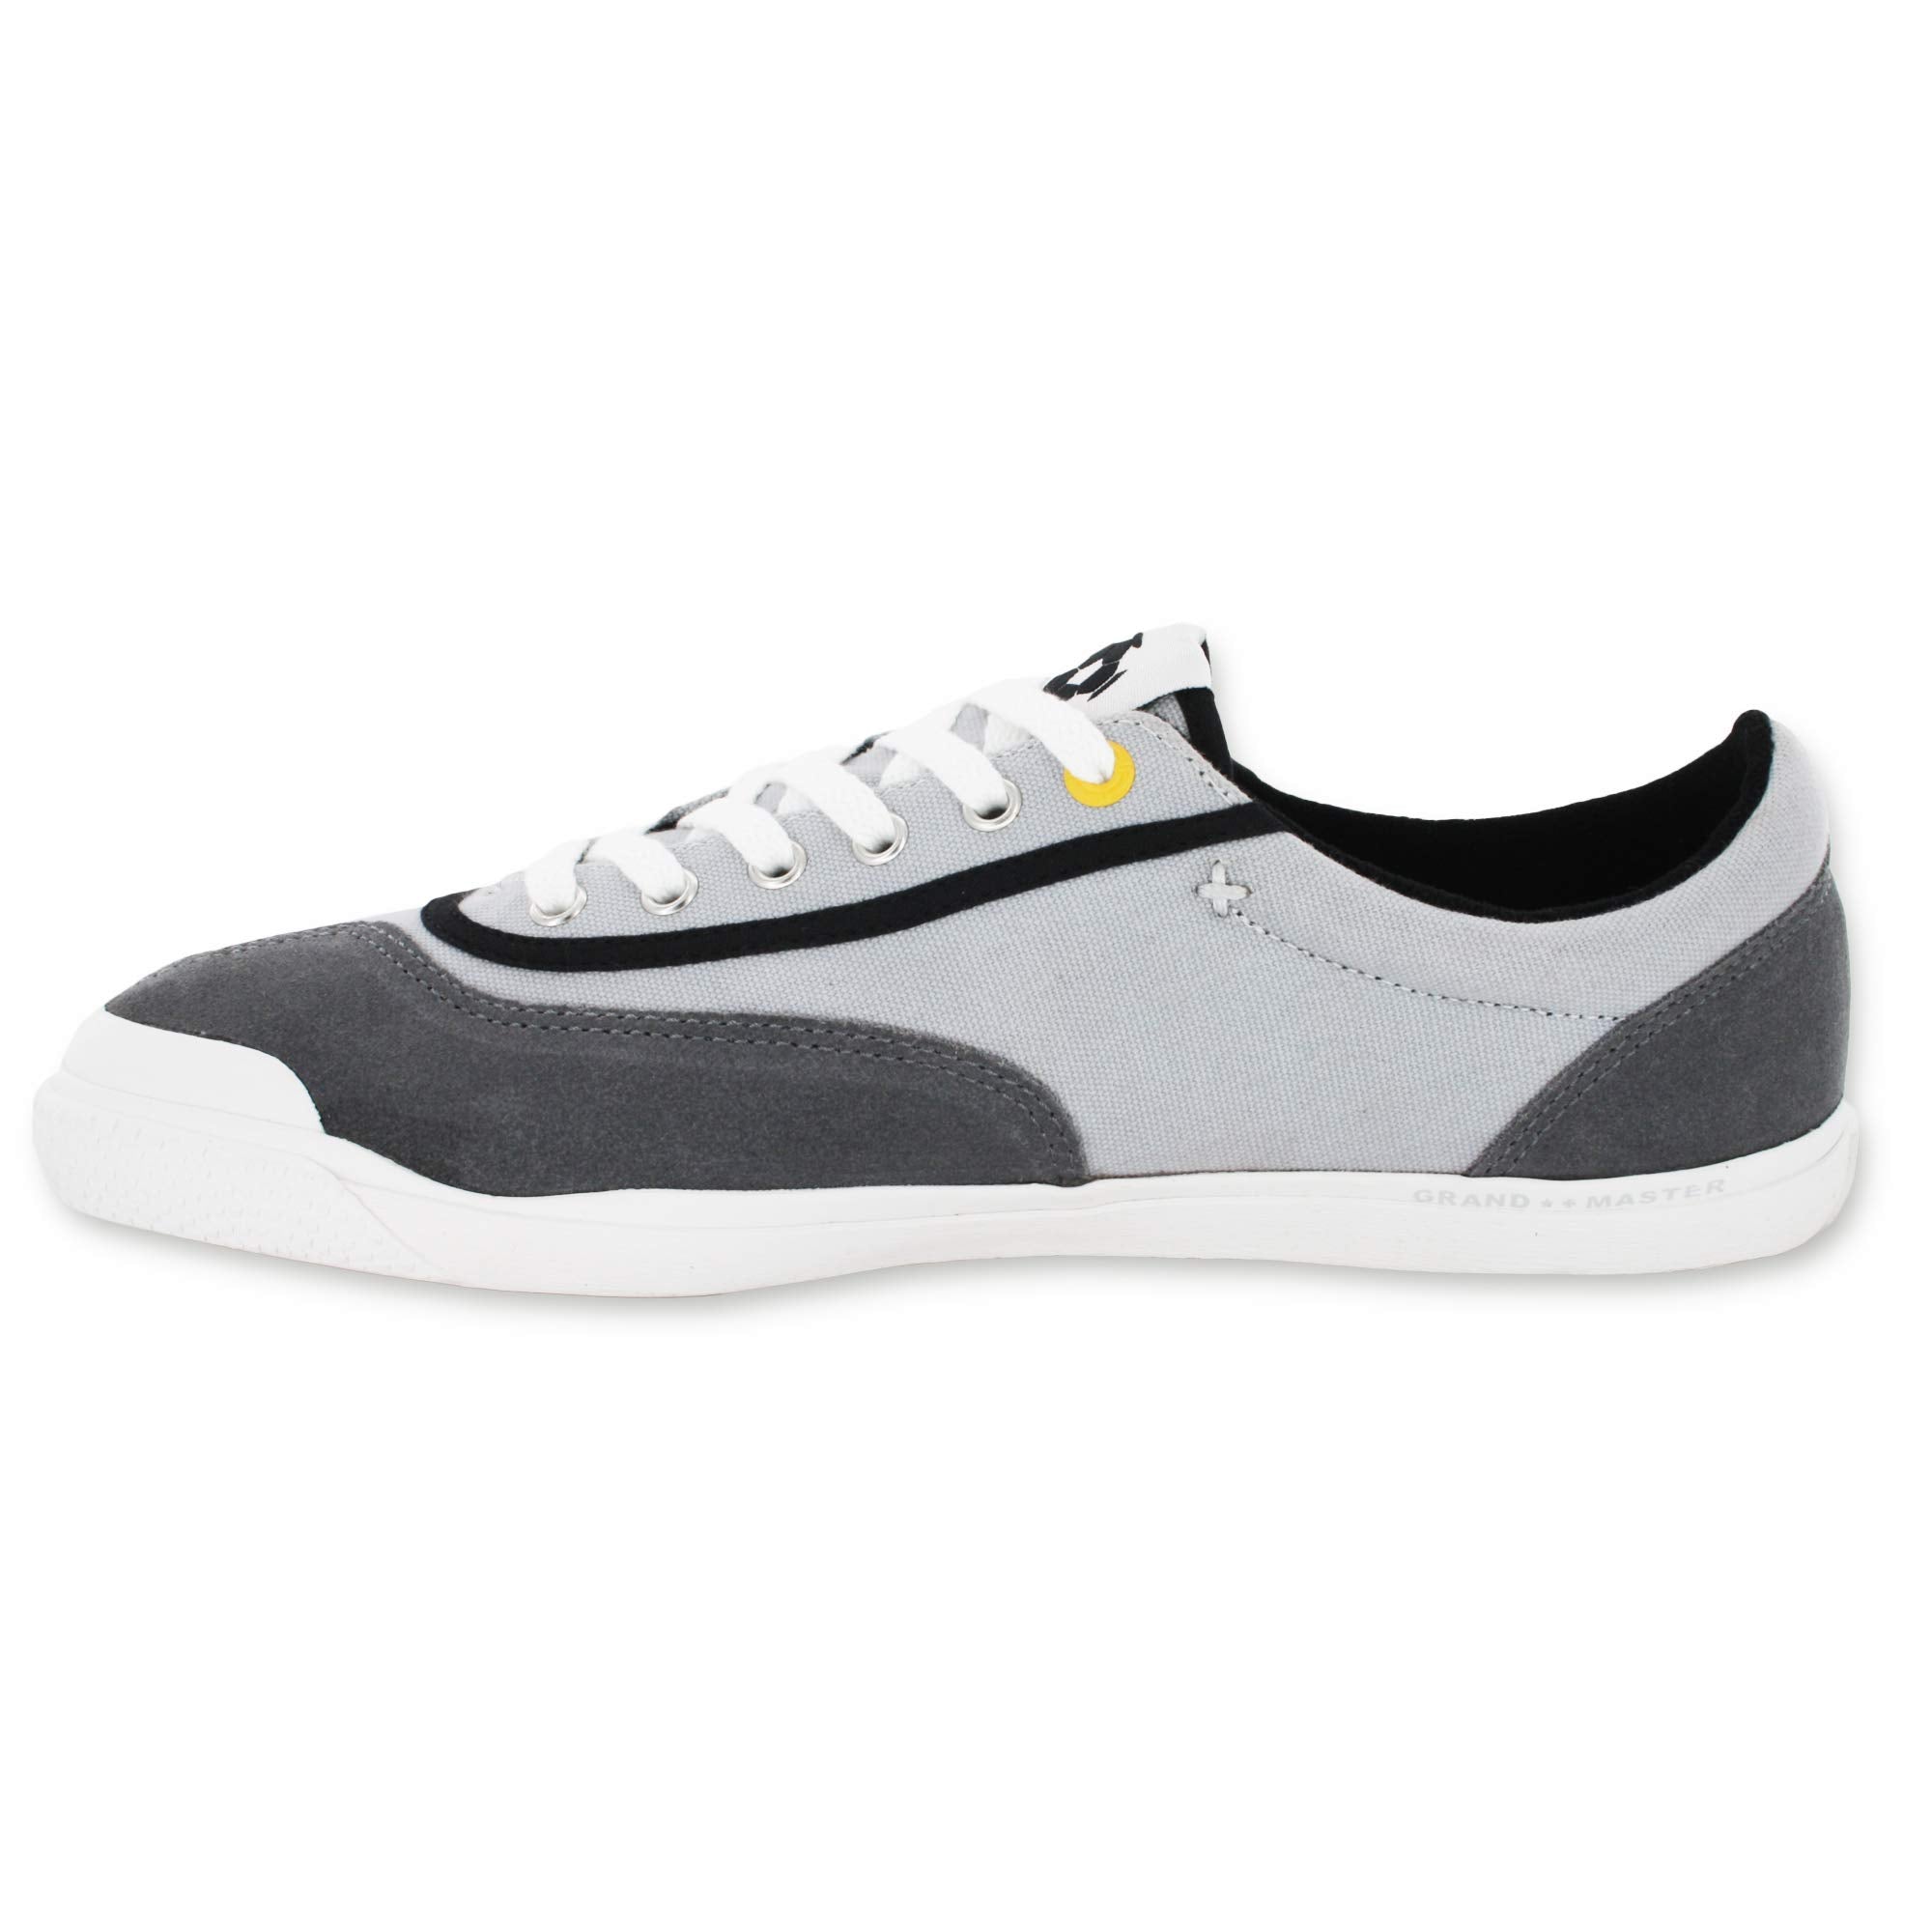 Pele Sports Men's Armador Canvas Sneakers - High Rise/Grey/White/Super Pink